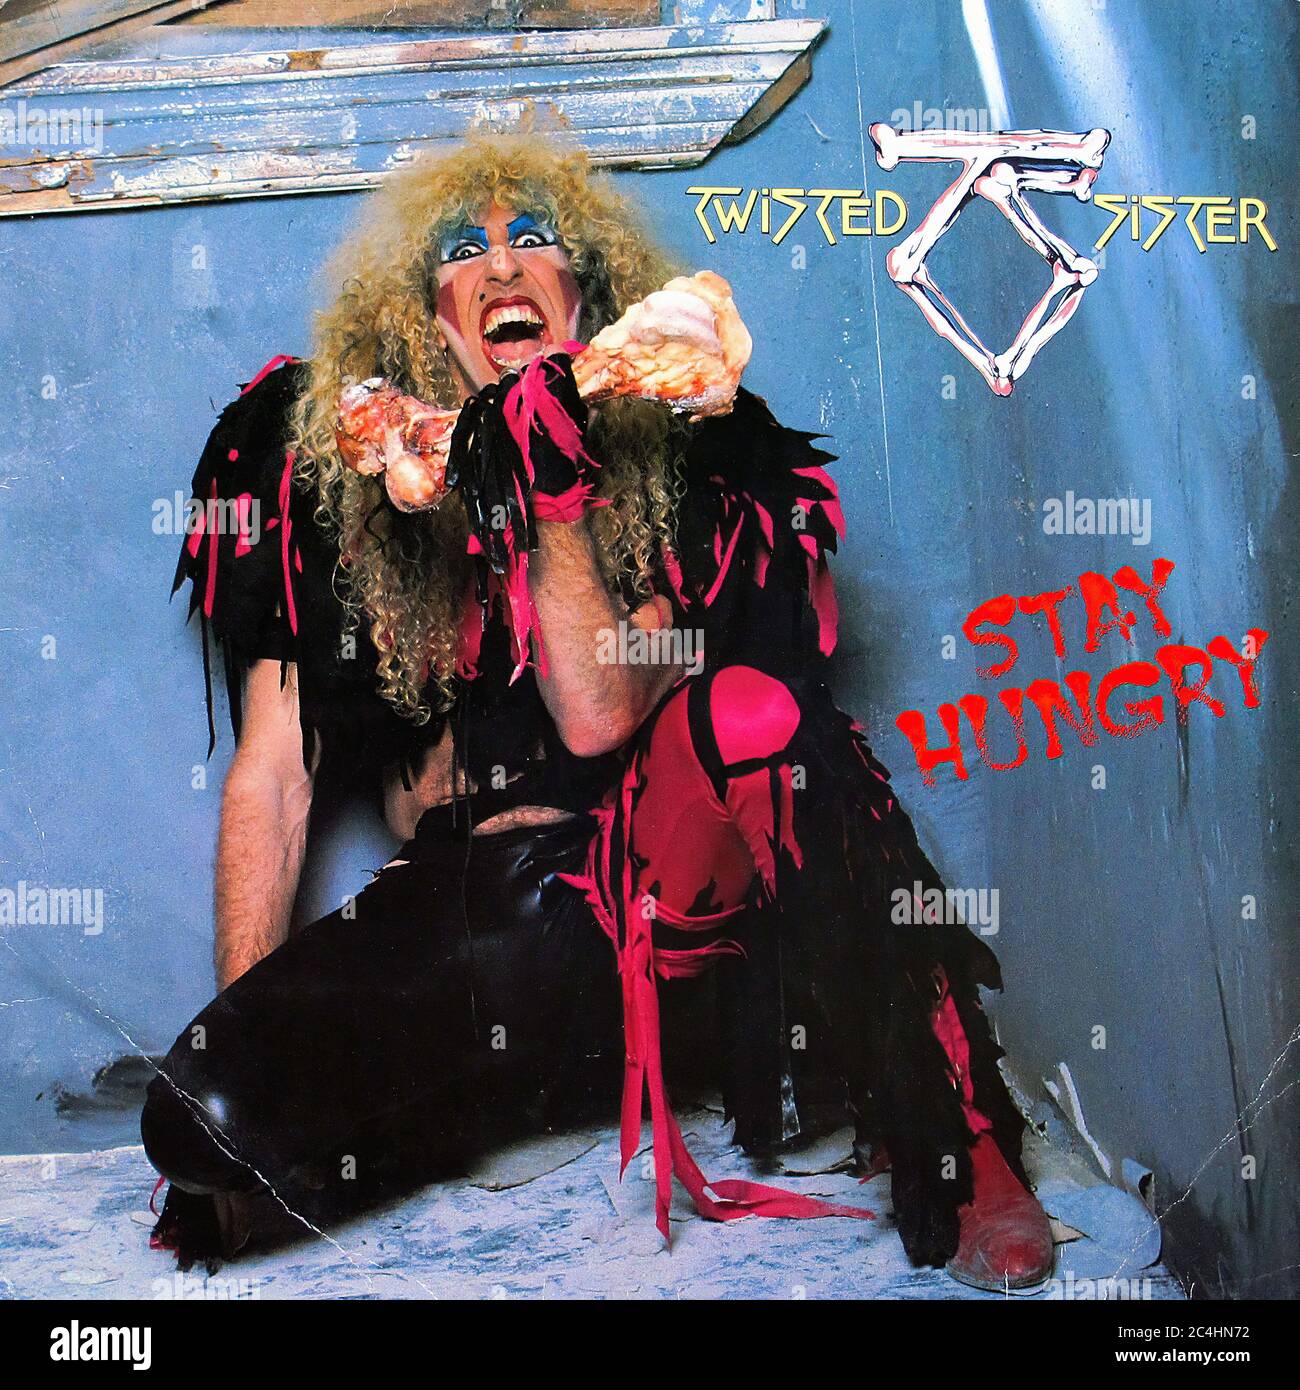 Twisted Sister Stay Hungry France 12'' Lp Vinyl - Vintage Record Cover ...